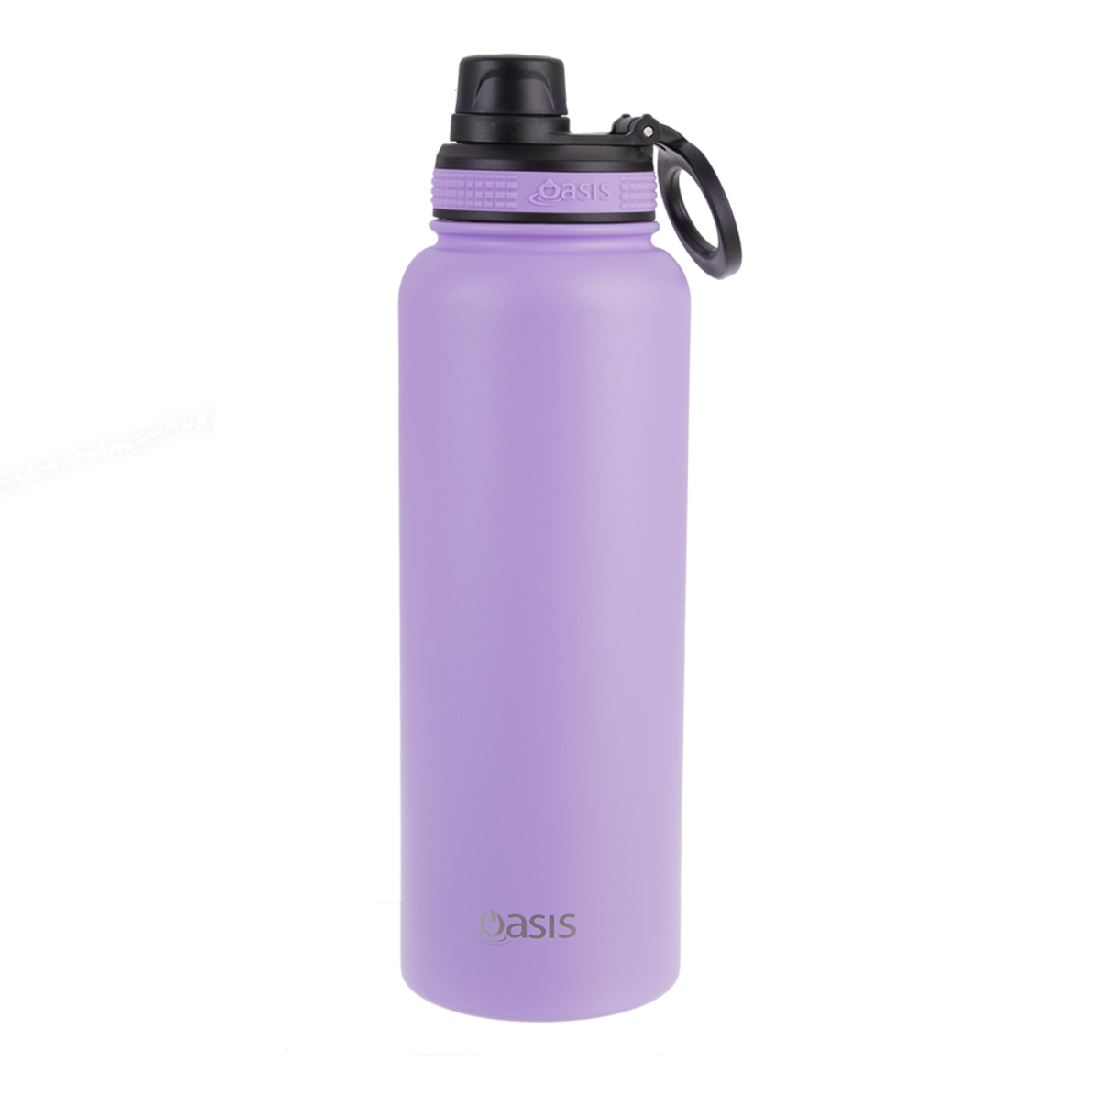 Oasis S/s Double Wall Insulated "challenger" Sports Bottle W/ Screw Cap 1.1l - Lavender